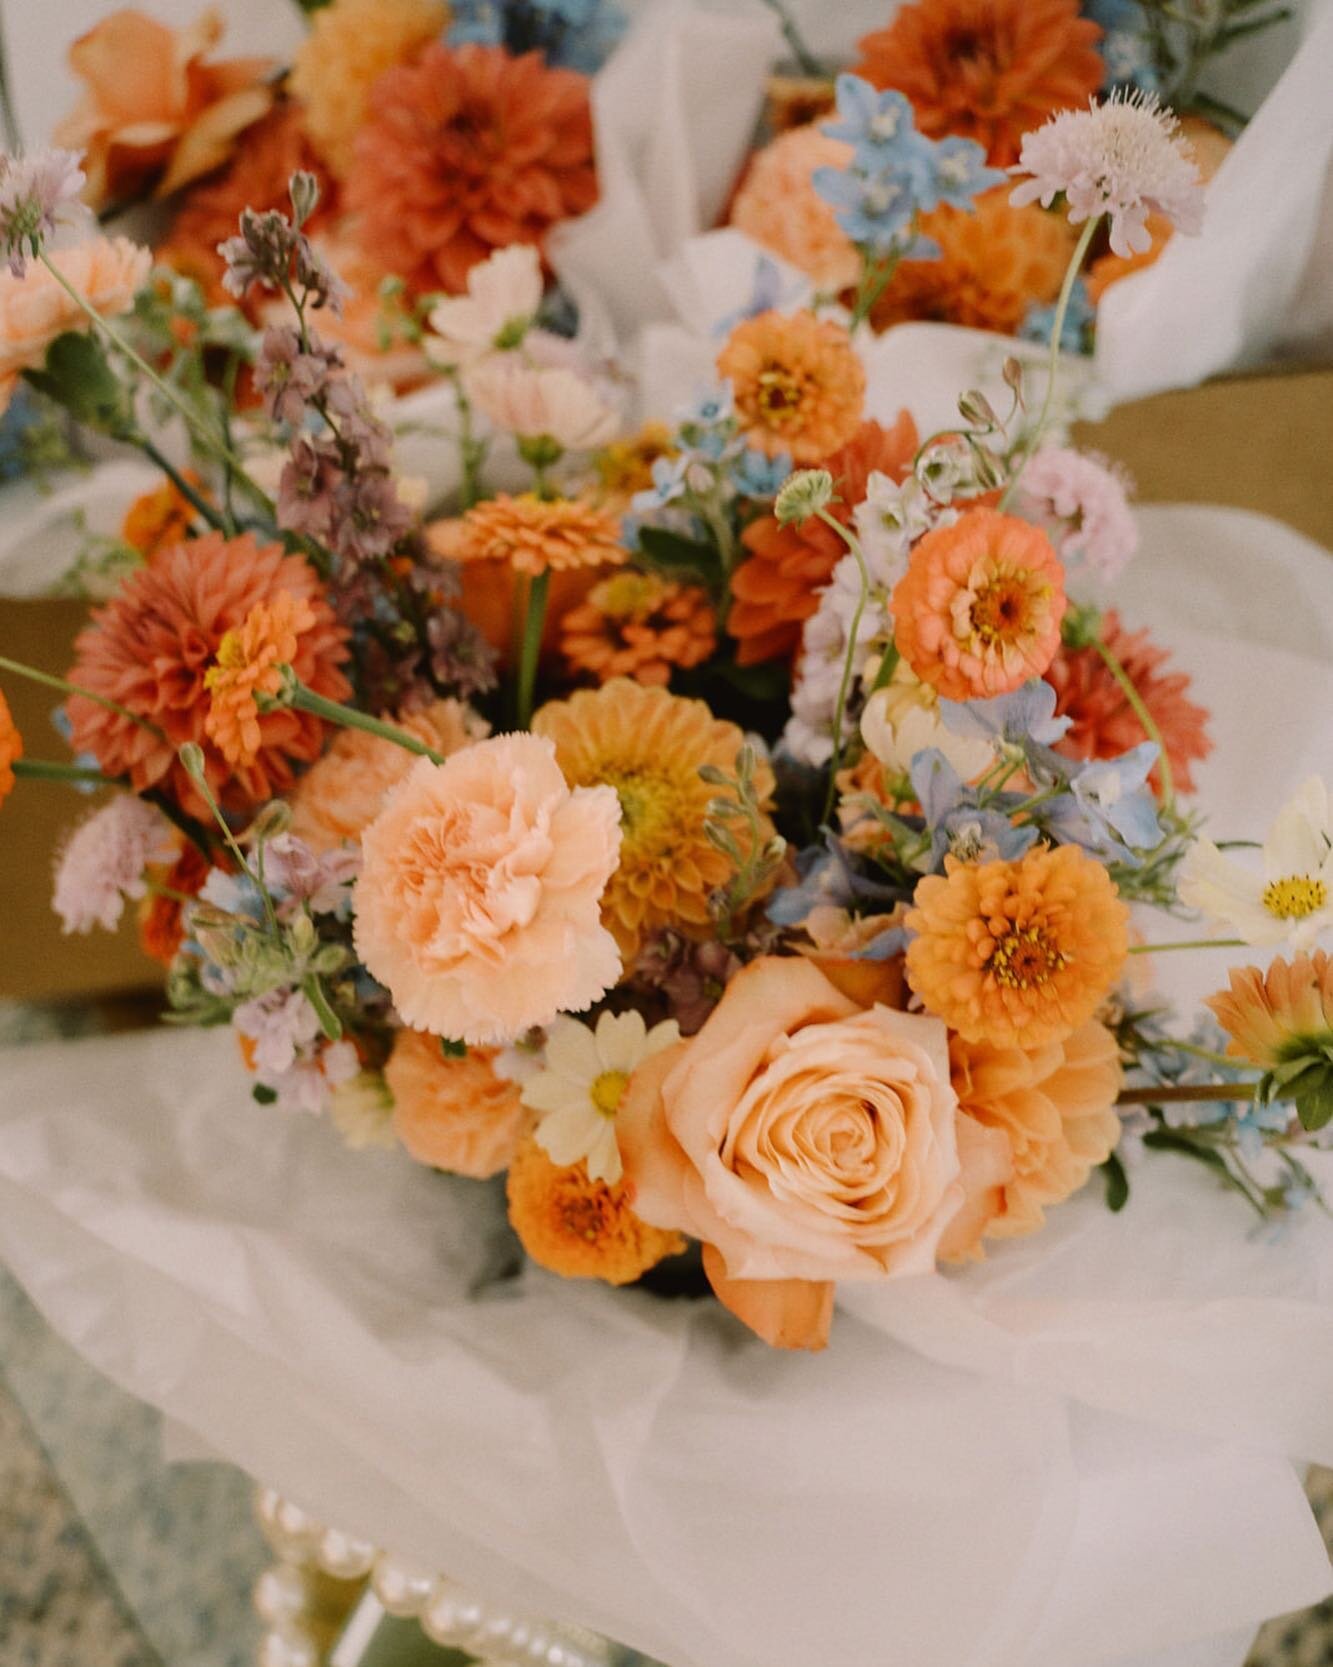 I loved this wedding!  Such a beautiful couple to work with, a stunning colour palette and the trust to just do my thing.
So beautiful ❤️

Image @alannahliddell

#farmerflorist #floraldesigner #slowlivingfarmer #sustainable #farmher #westernaustralia